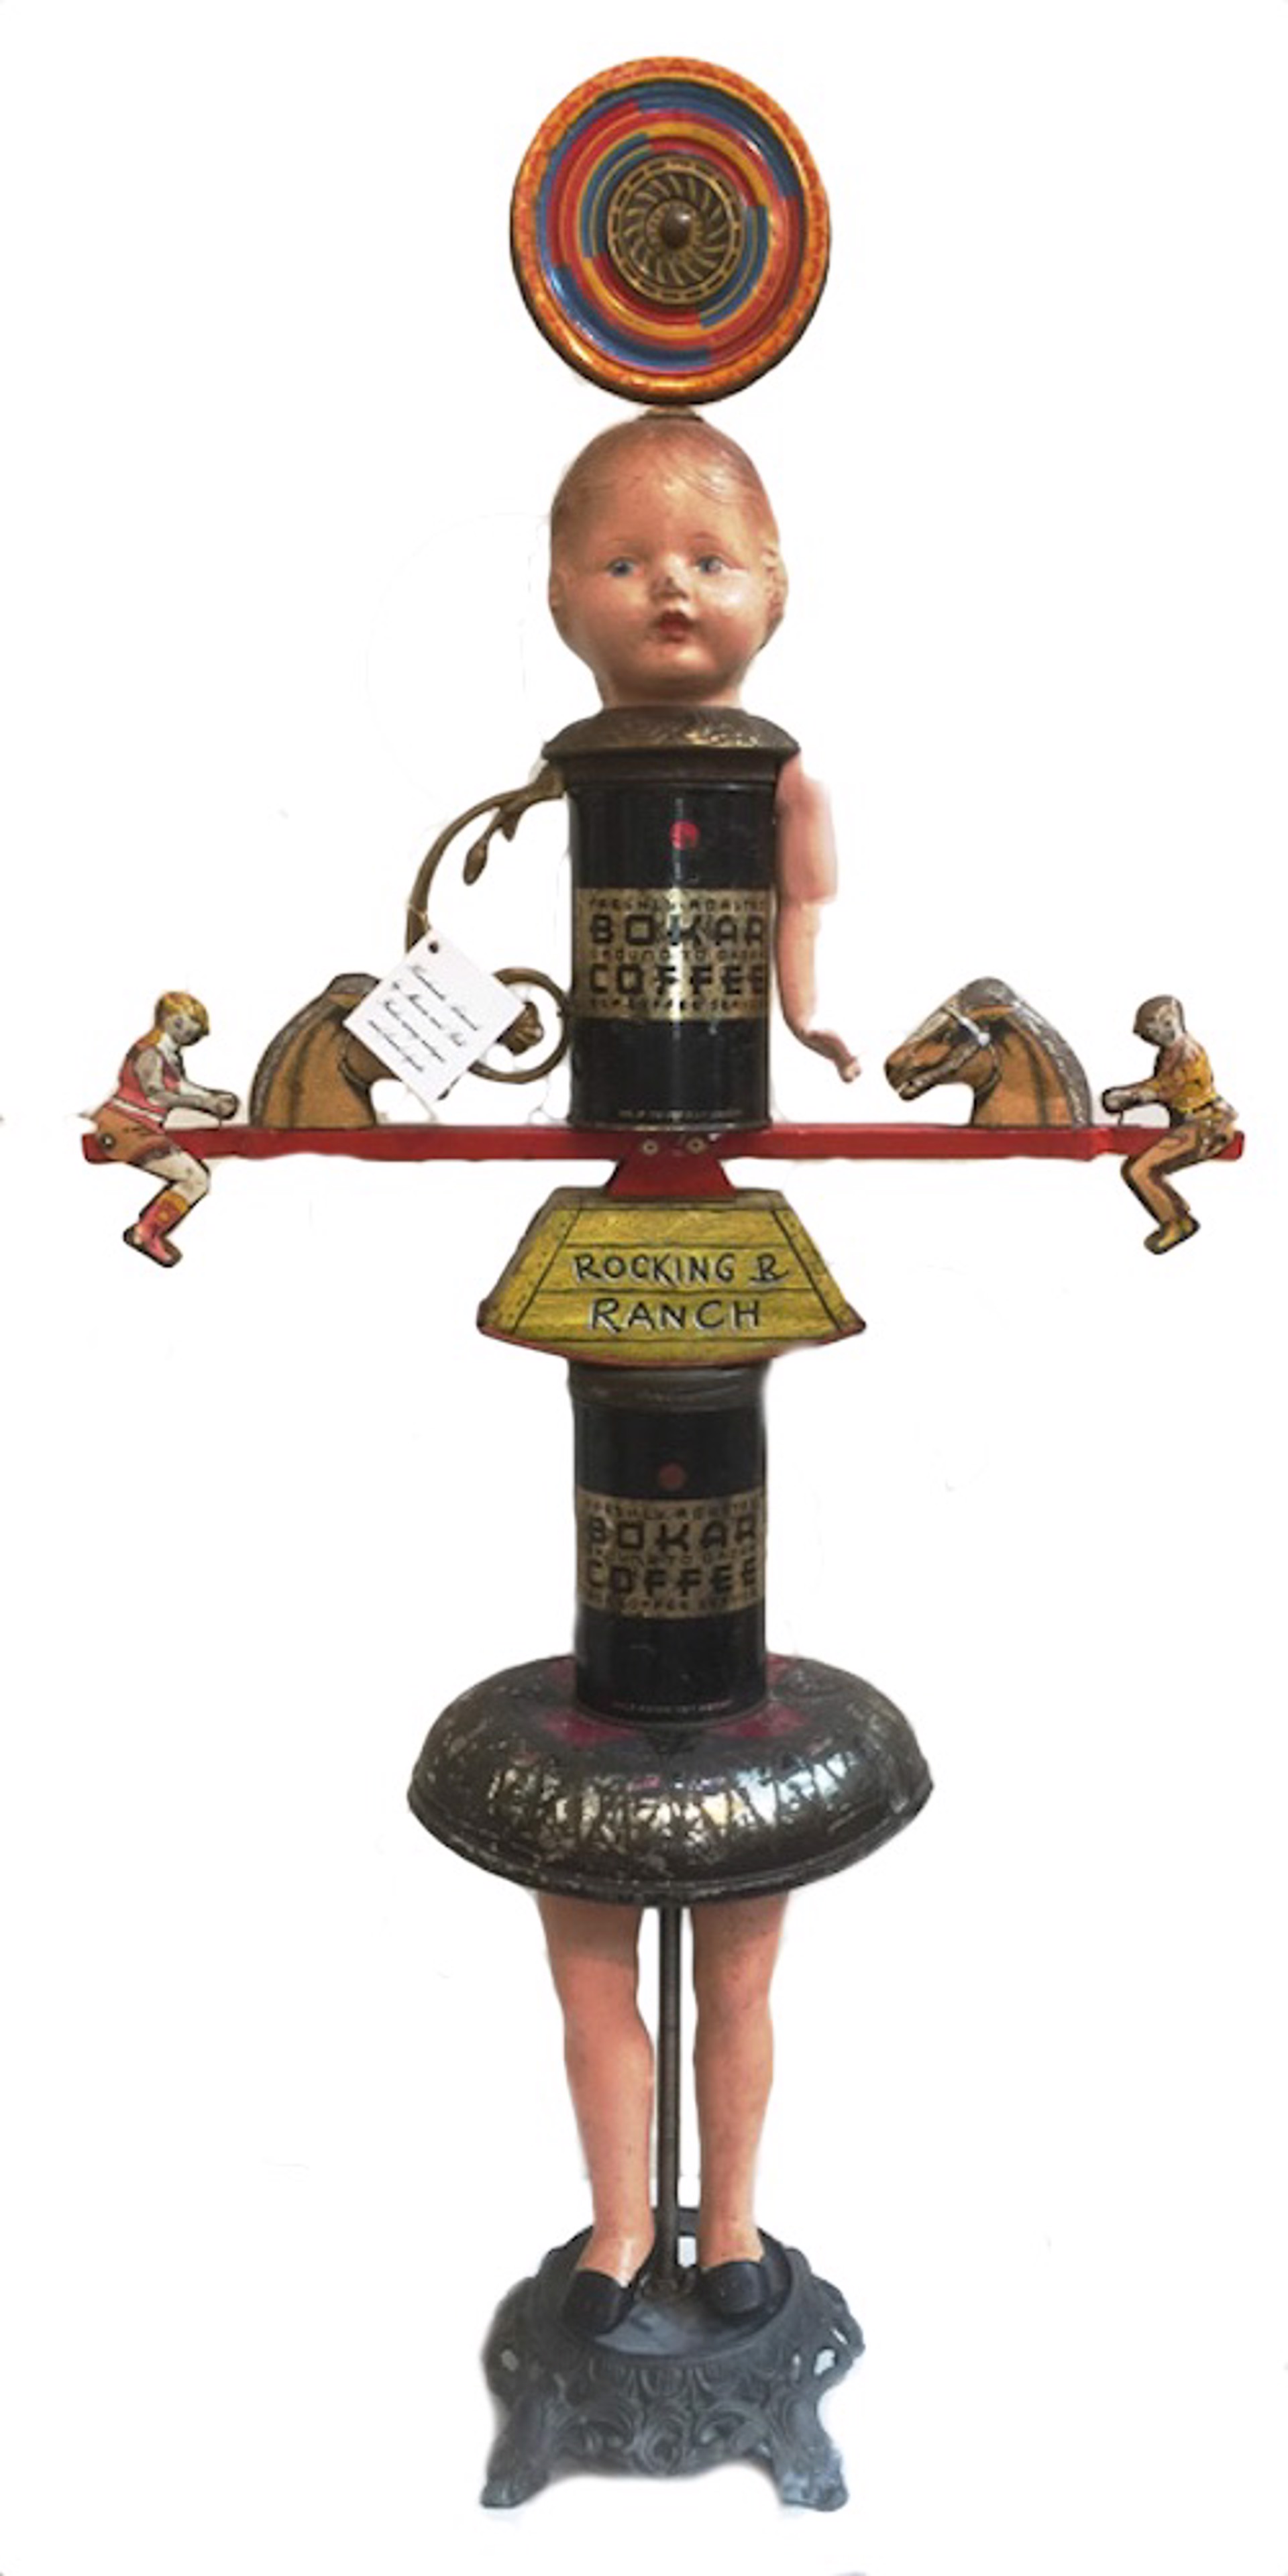 Rocking R Ranch Girl - One of kind Vintage Assemblage by Bill Finks